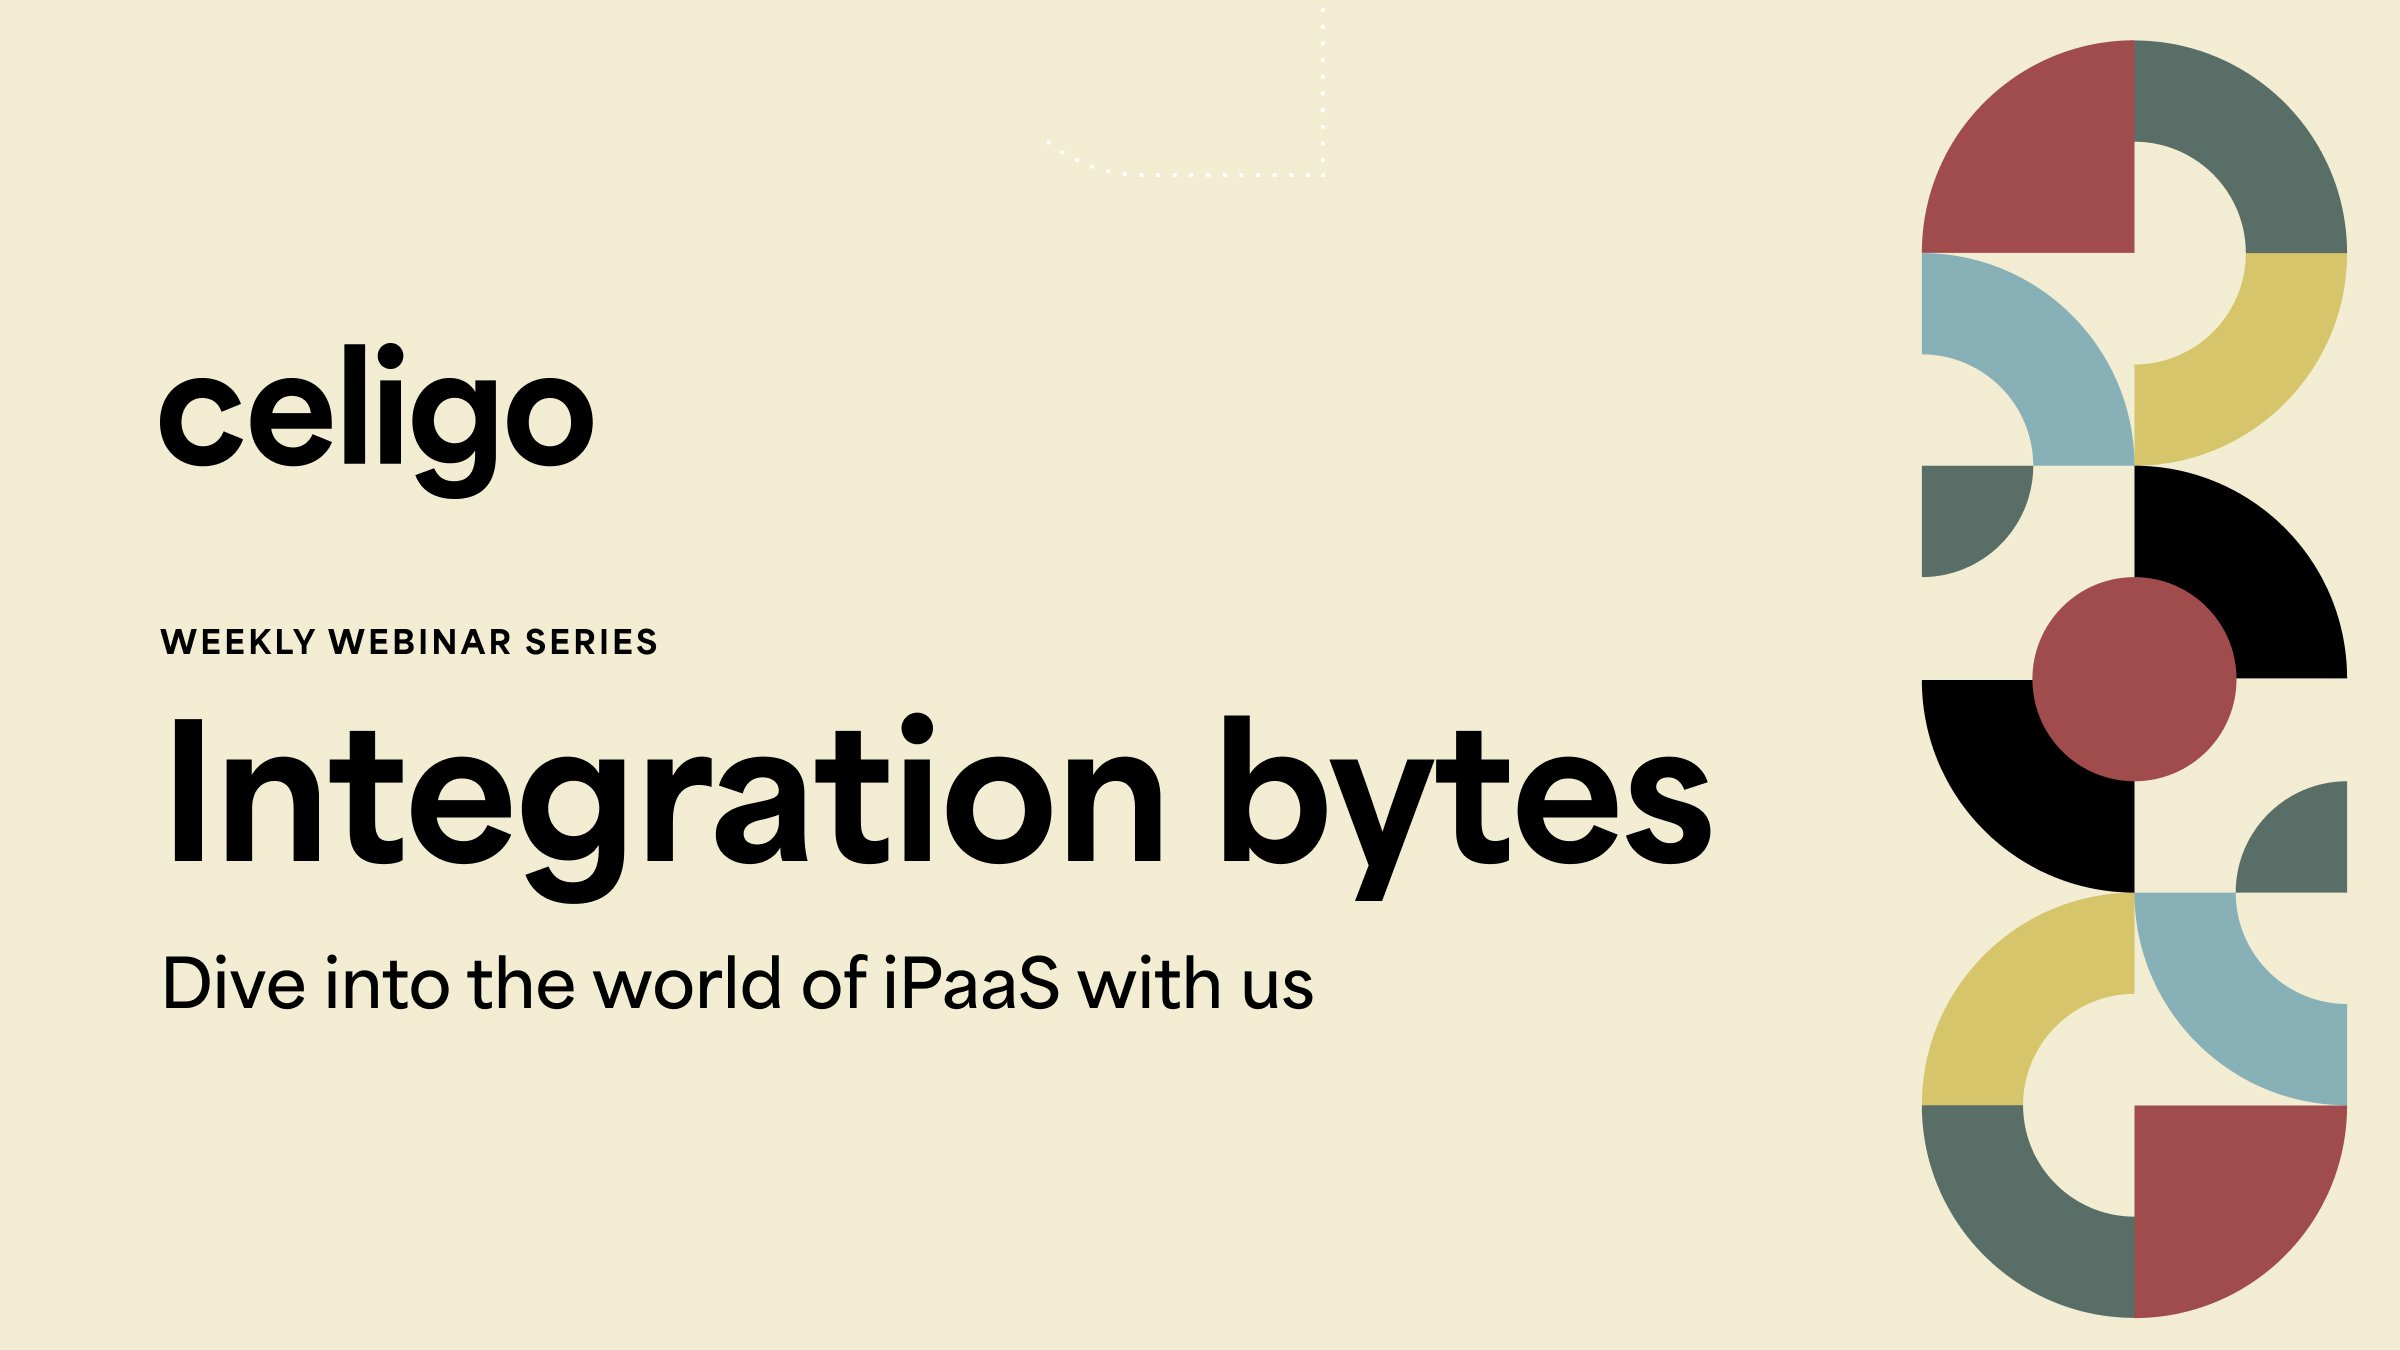 Join the conversation: Introducing “Integration bytes” weekly webinar series